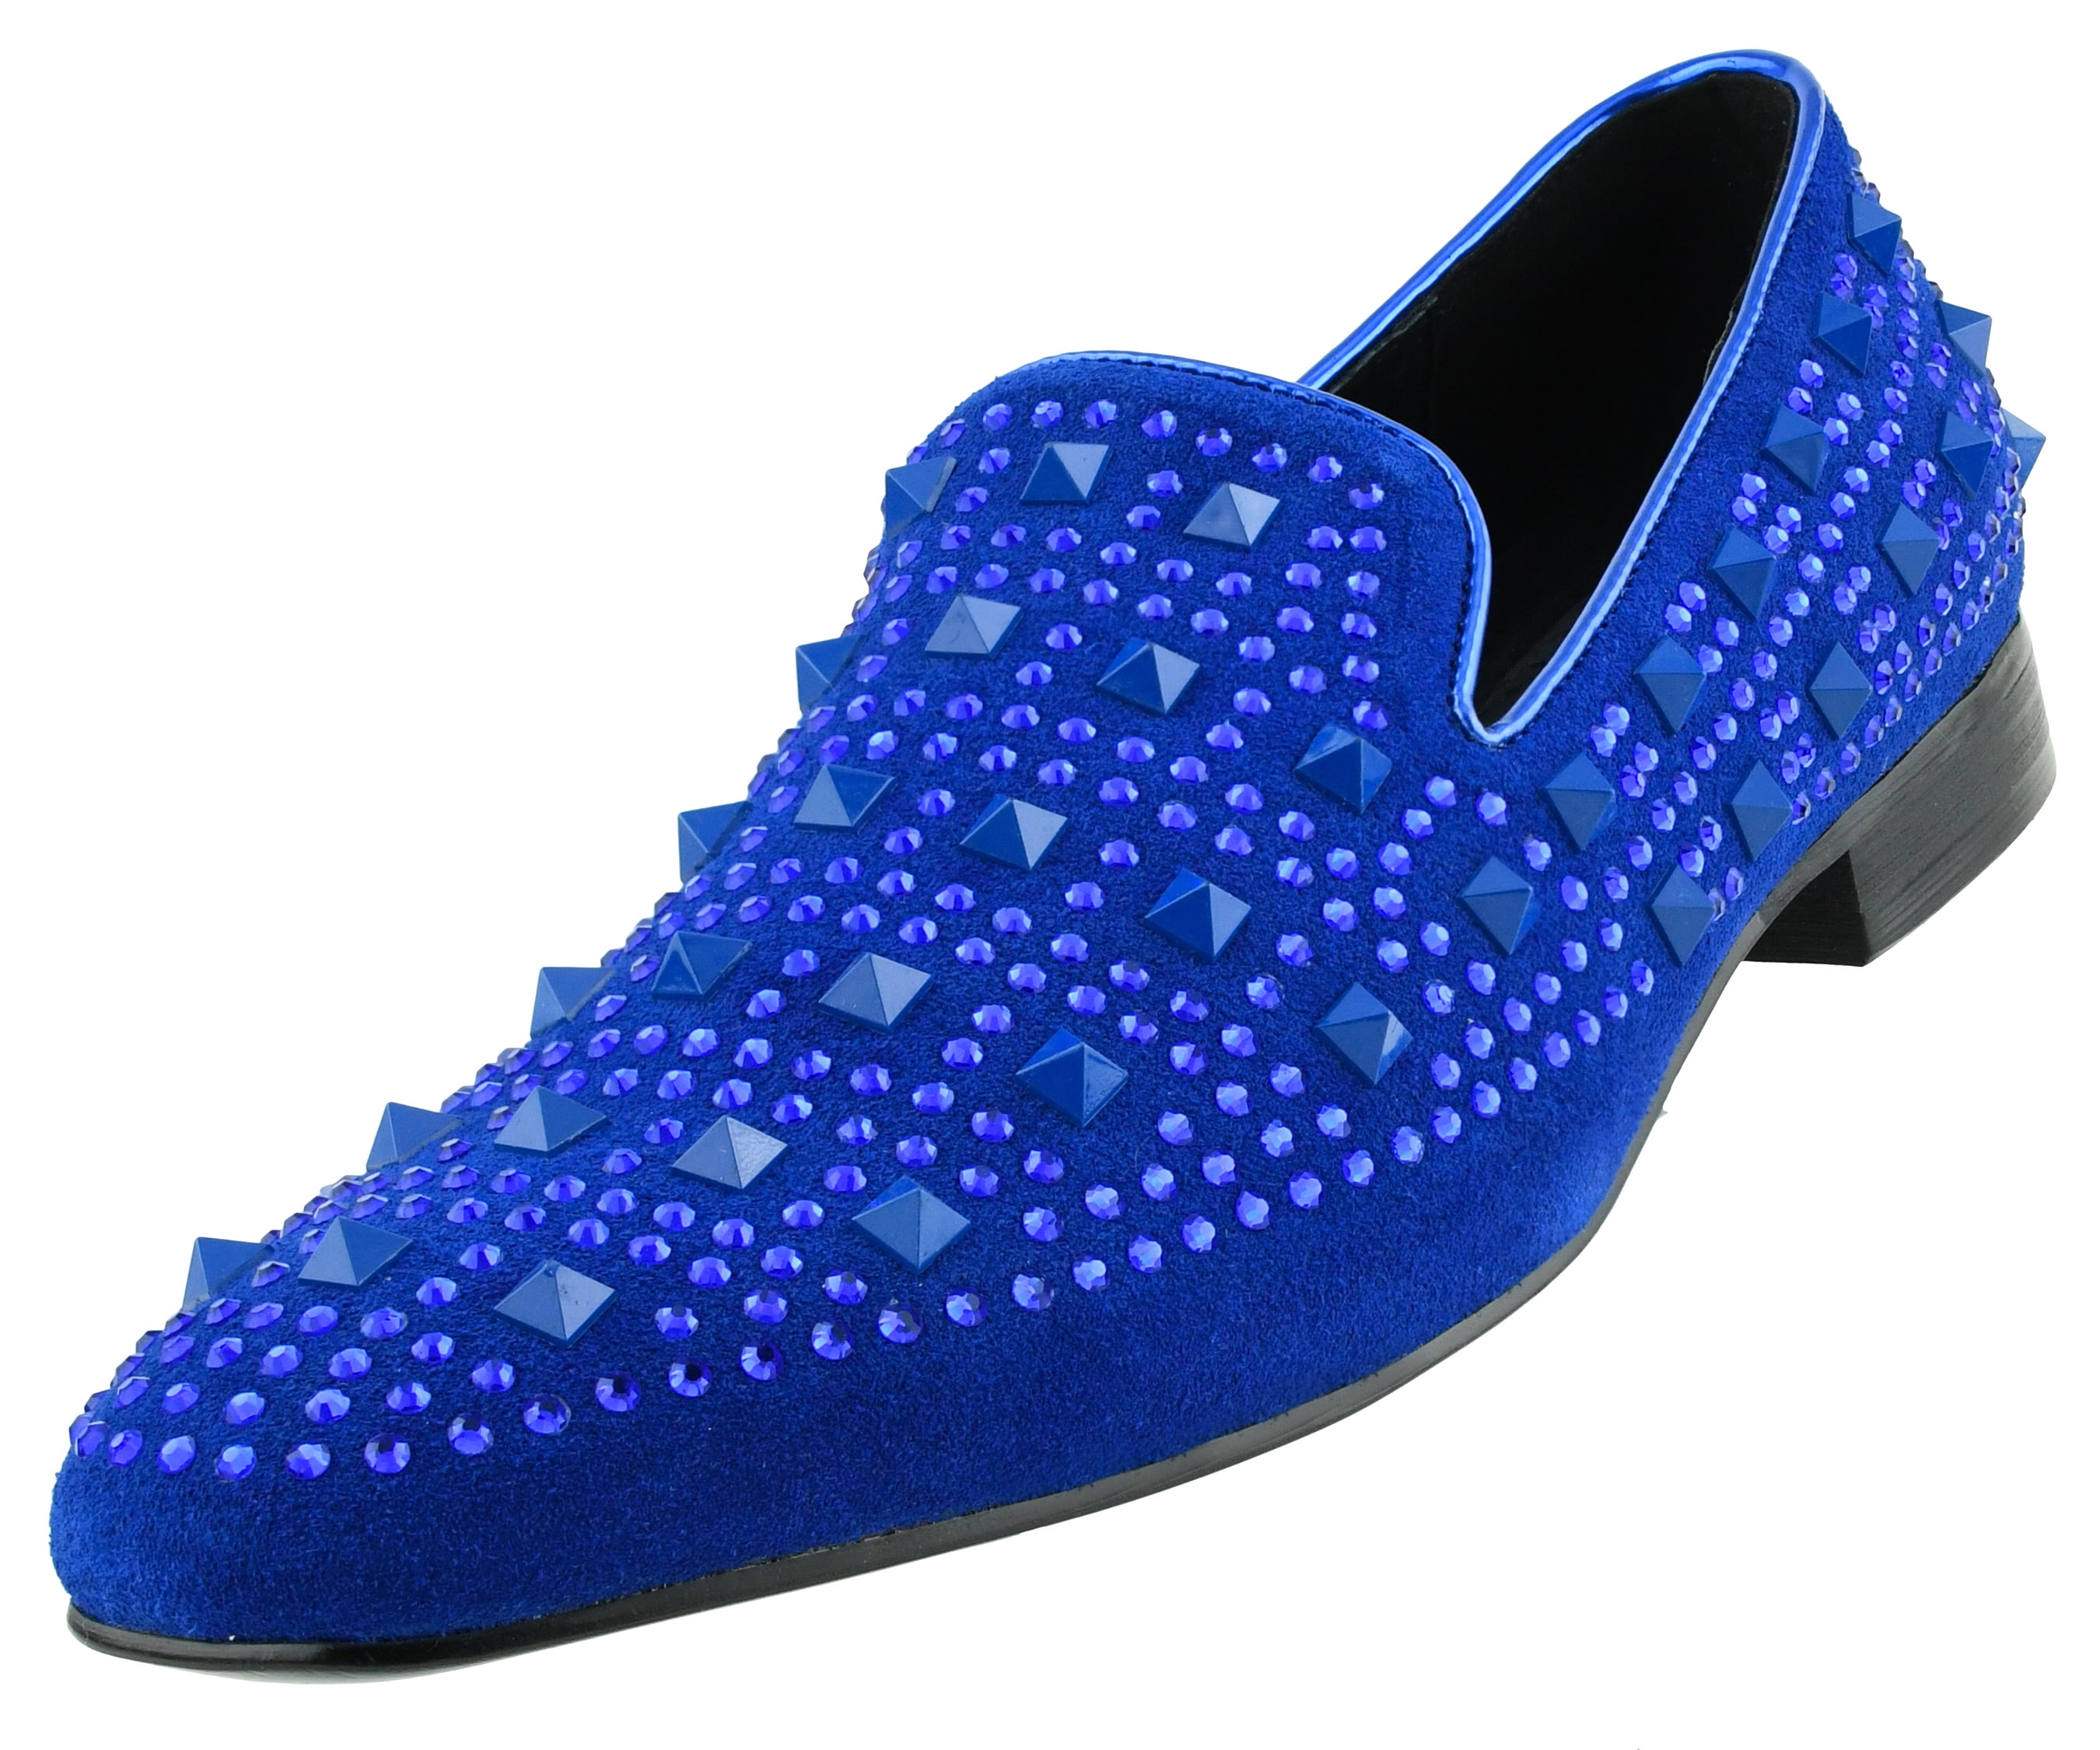 AG5000 Asher Green Men's Tonal Crystal and Studded Suede Slip On Dress Shoe 